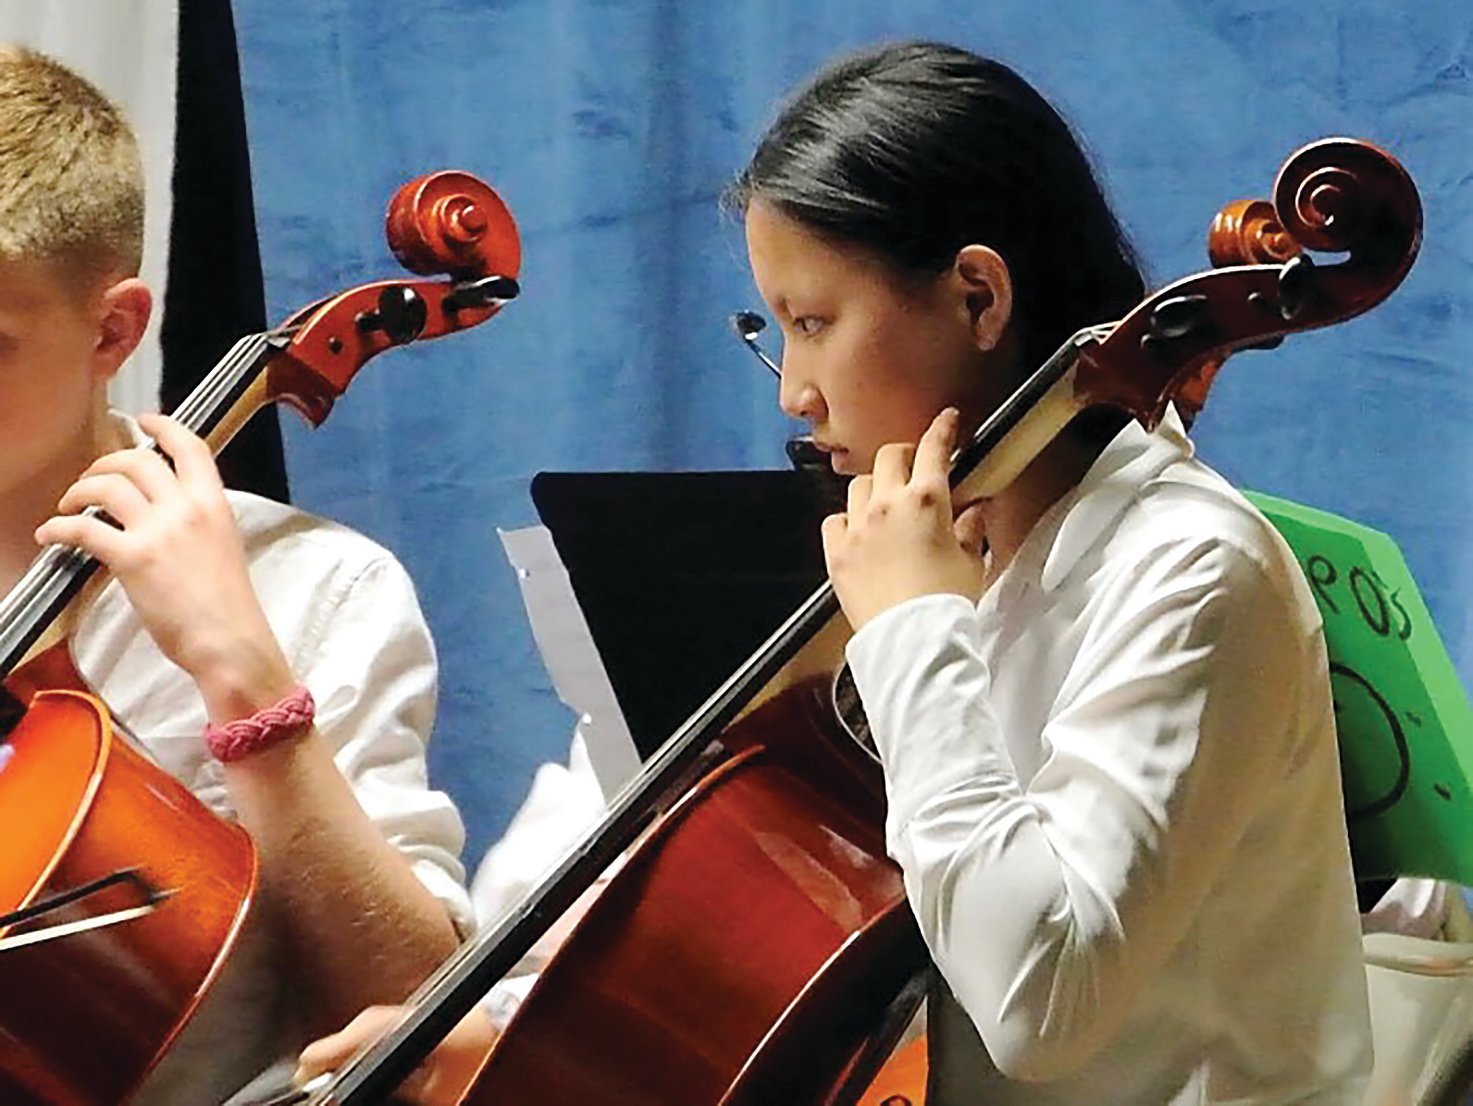 Prout School cellist Lena Eng has advanced to the prestigious music competetion where she will play later this year.